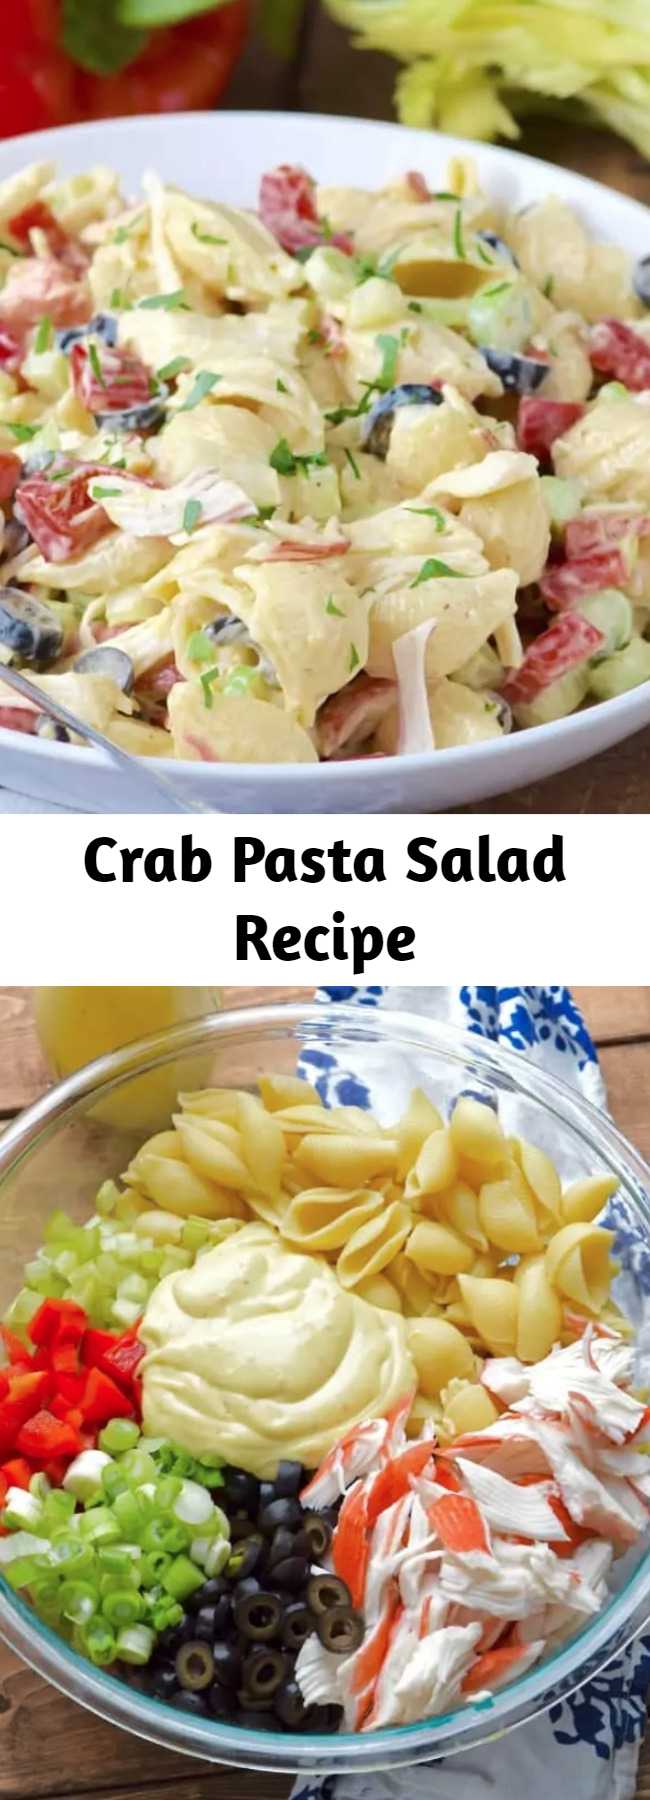 Crab Pasta Salad Recipe - This Crab Pasta Salad is a family recipe, one of my favorites! Packed with veggies and delicious flavor, it’s a staple at summer BBQs! This crab pasta salad is made with Italian dressing and either Spike or Old Bay Seasoning.